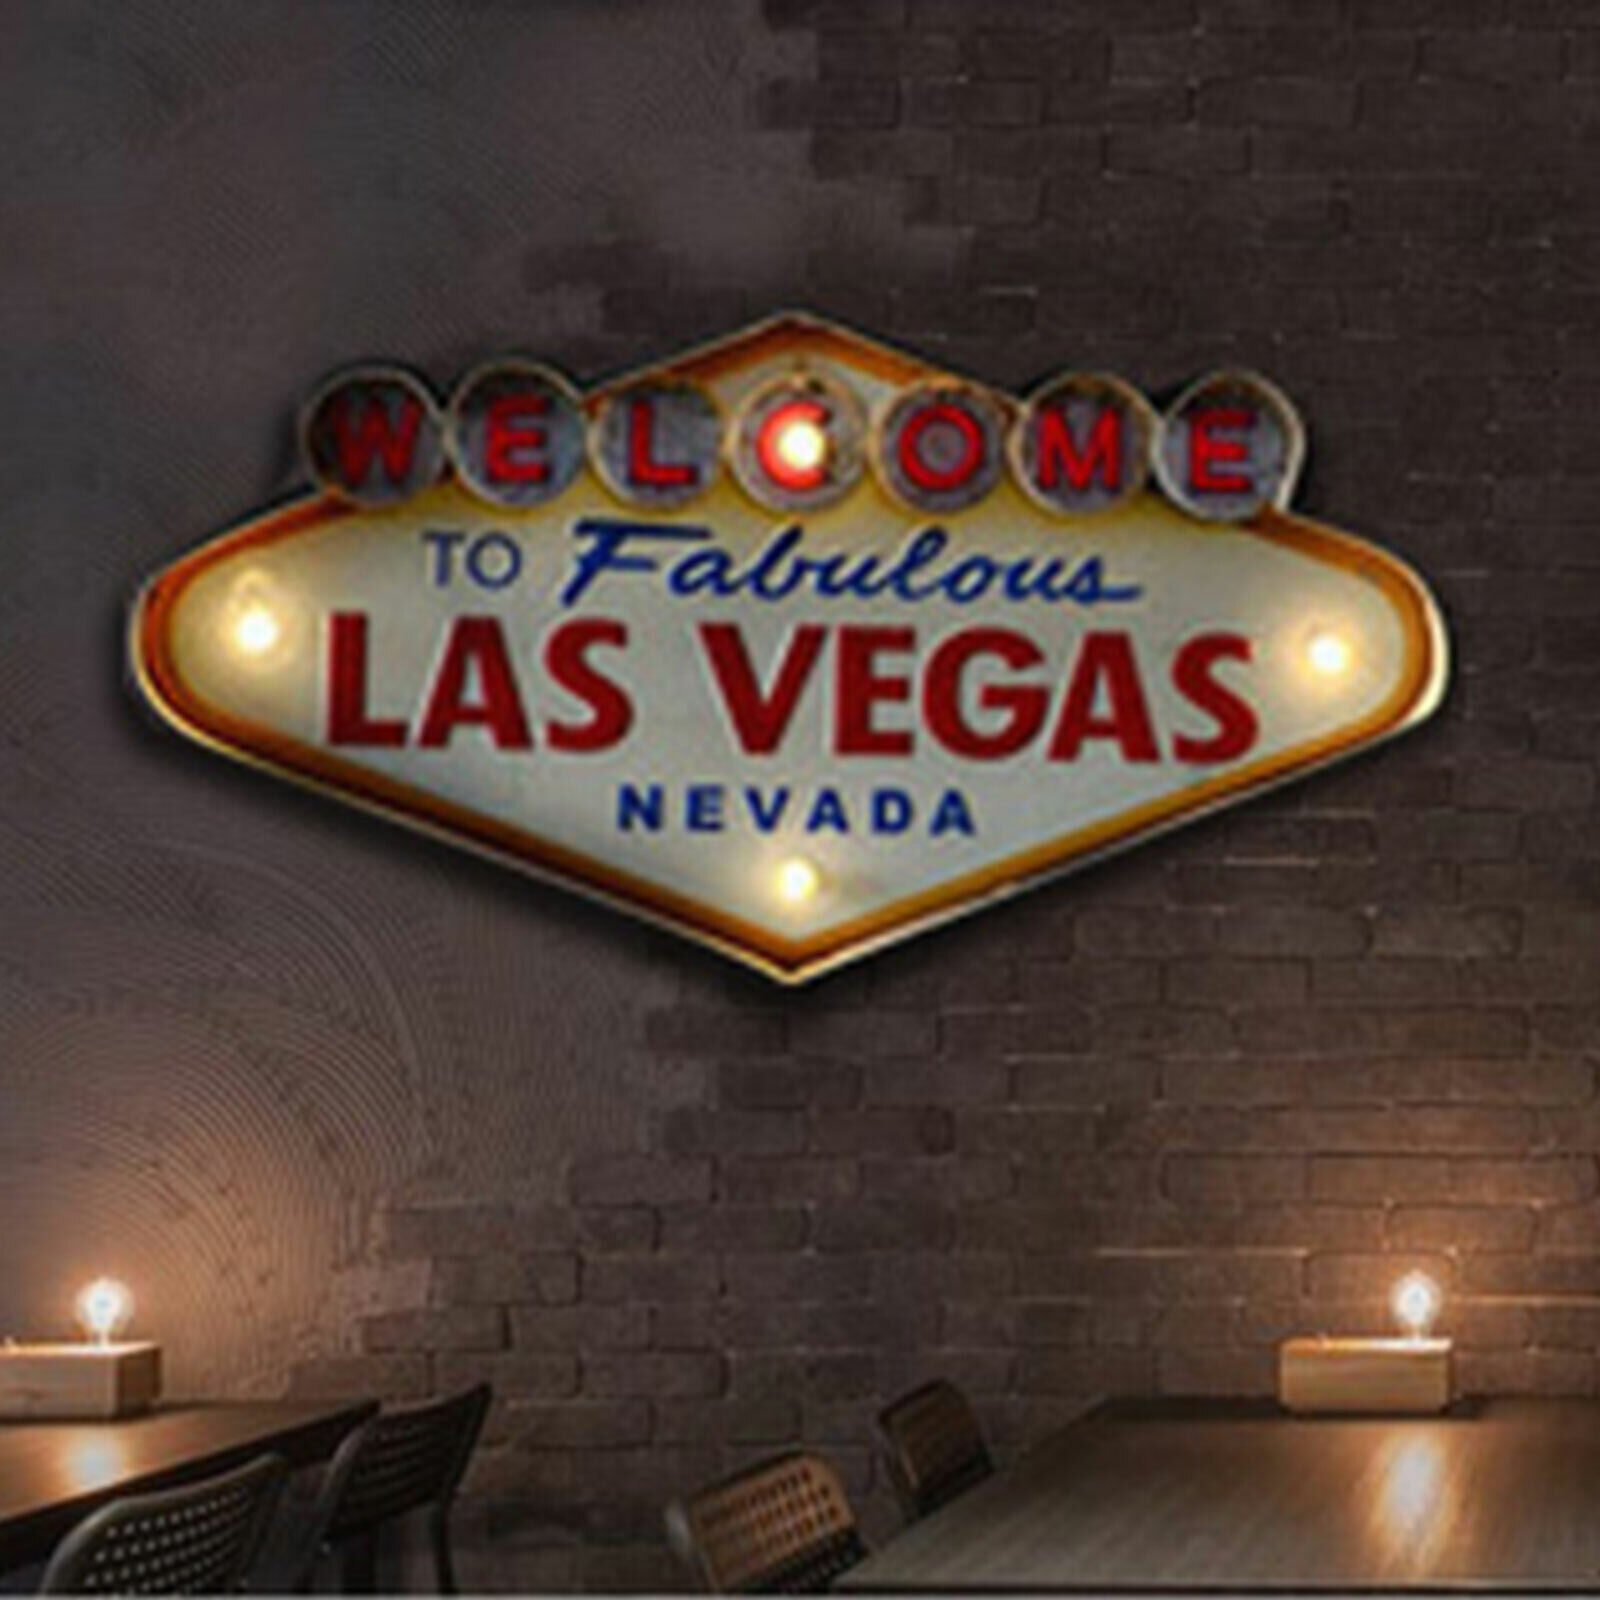 Vintage LED Light Metal Neon Signs Welcome to Las Vegas Pub Cafe Wall Decor